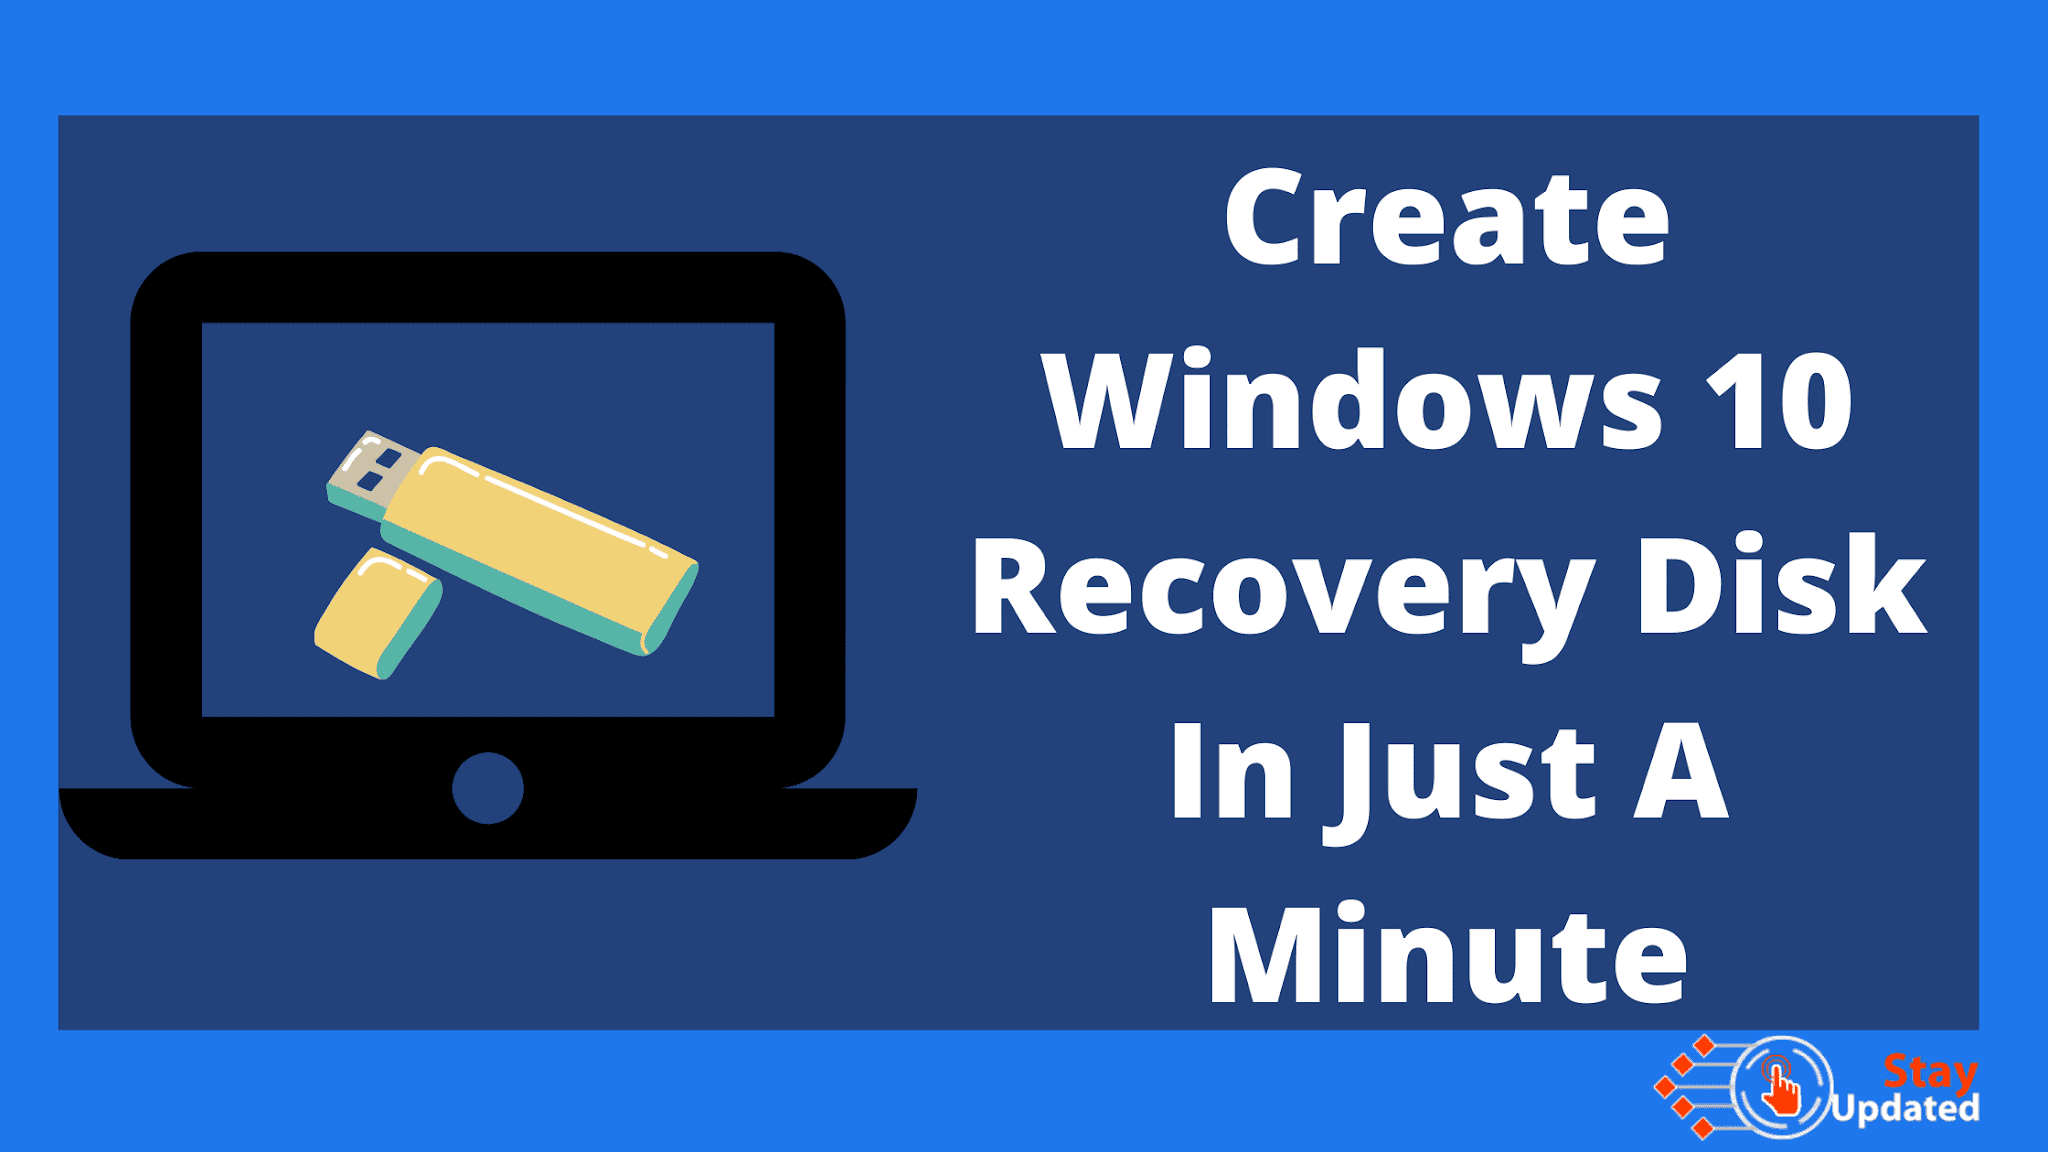 can i download a windows 10 recovery disk